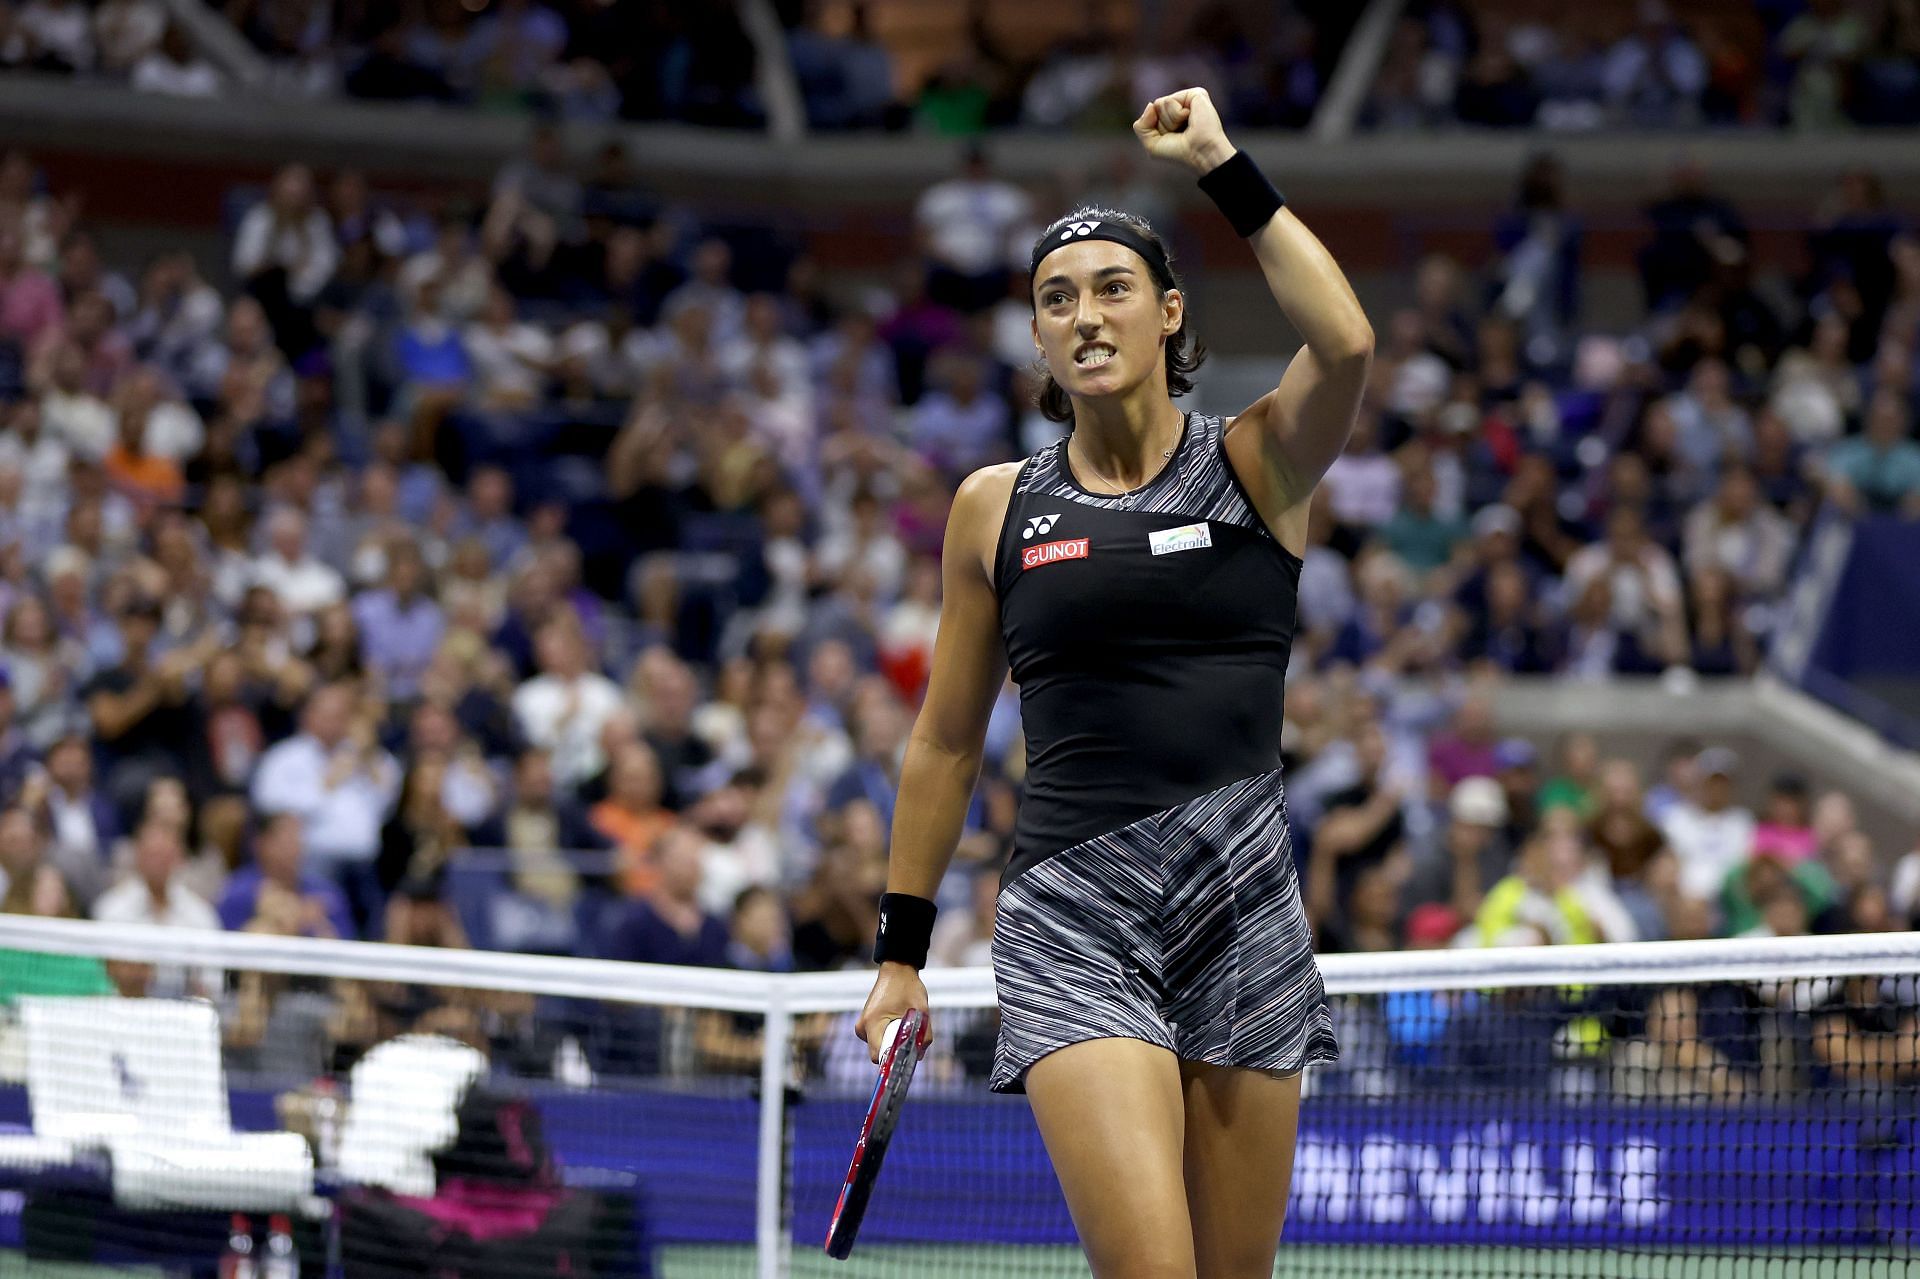 Caroline Garcia will take on Ons Jabeur for a spot in the final of the New York Major